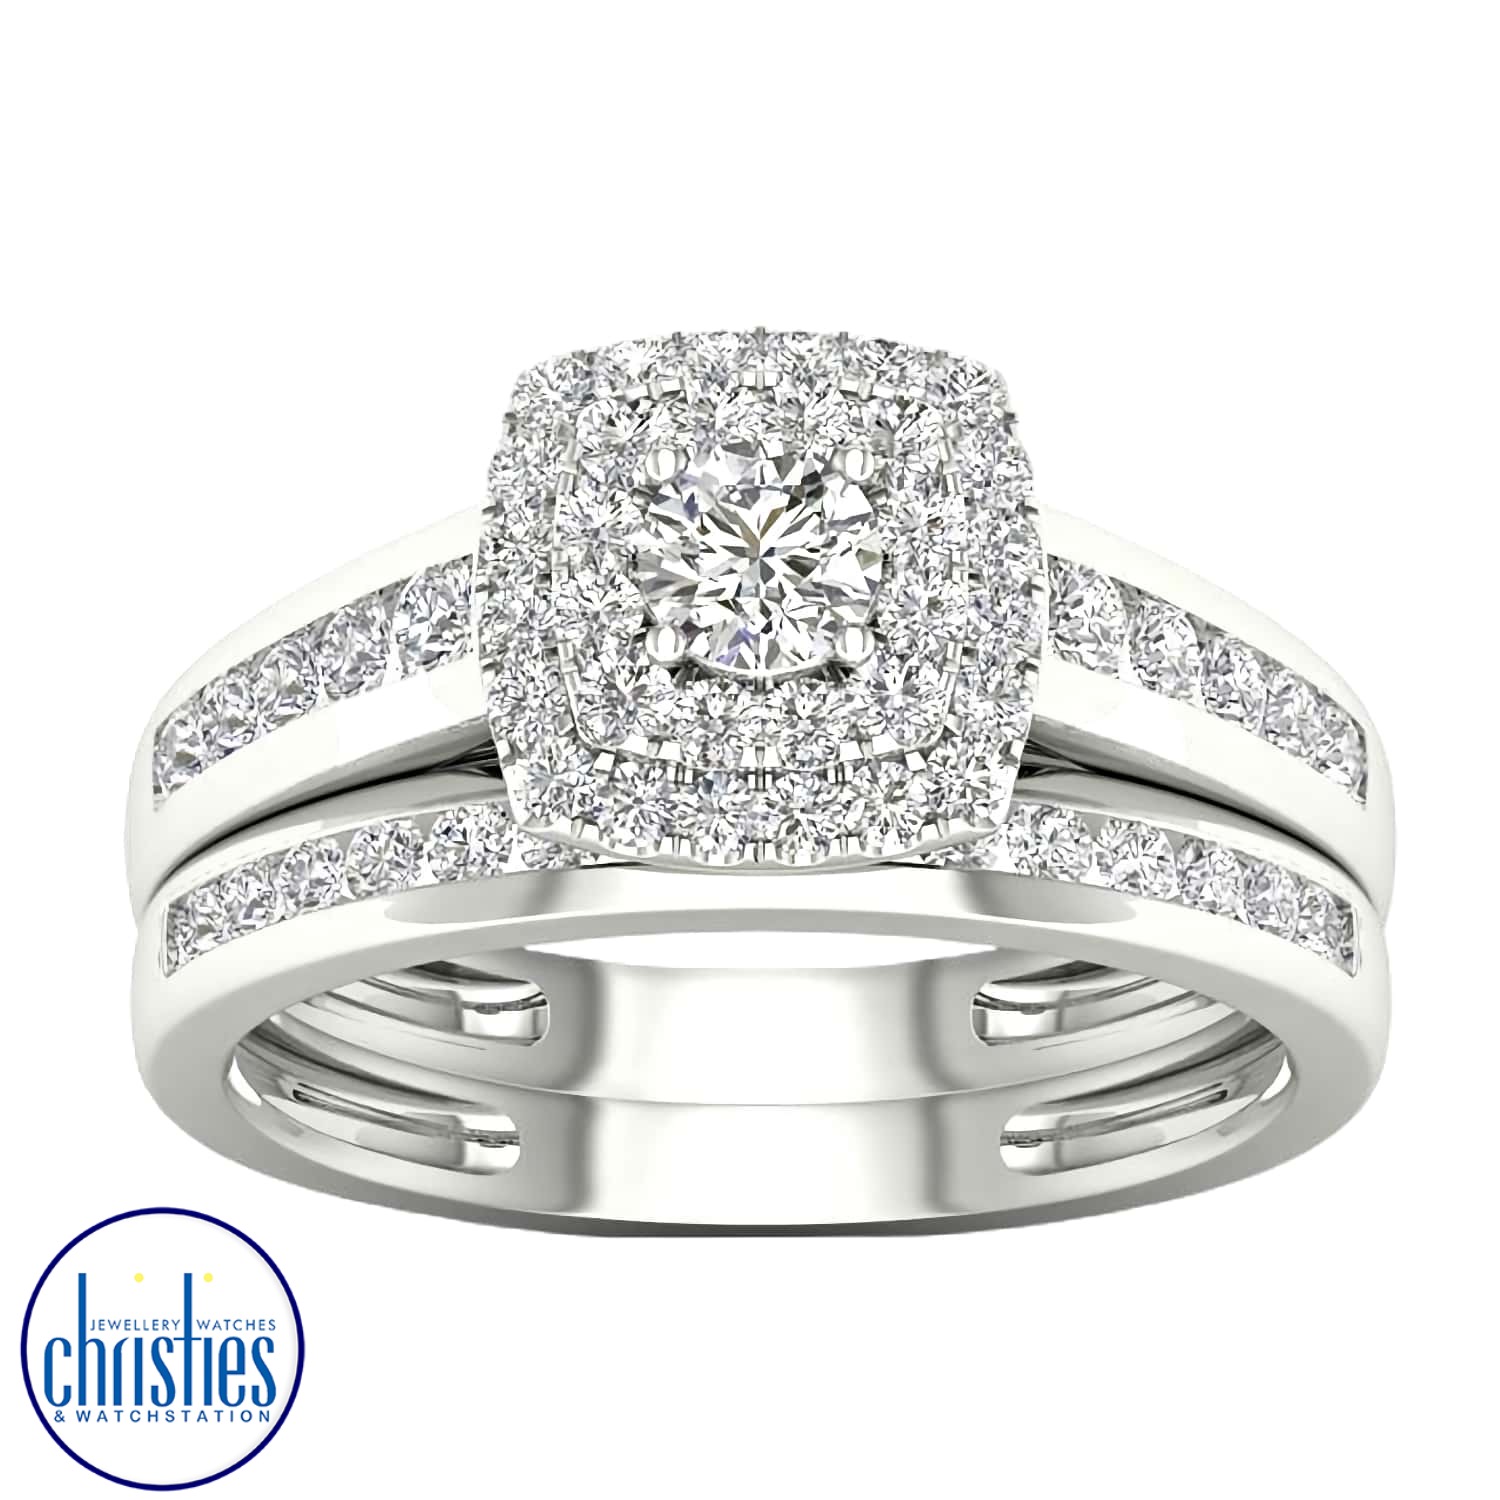 18ct White Gold Diamond Wedding Set 0.75ct TDW RB14534.  Affordable Engagement Rings Nz $3,995.00